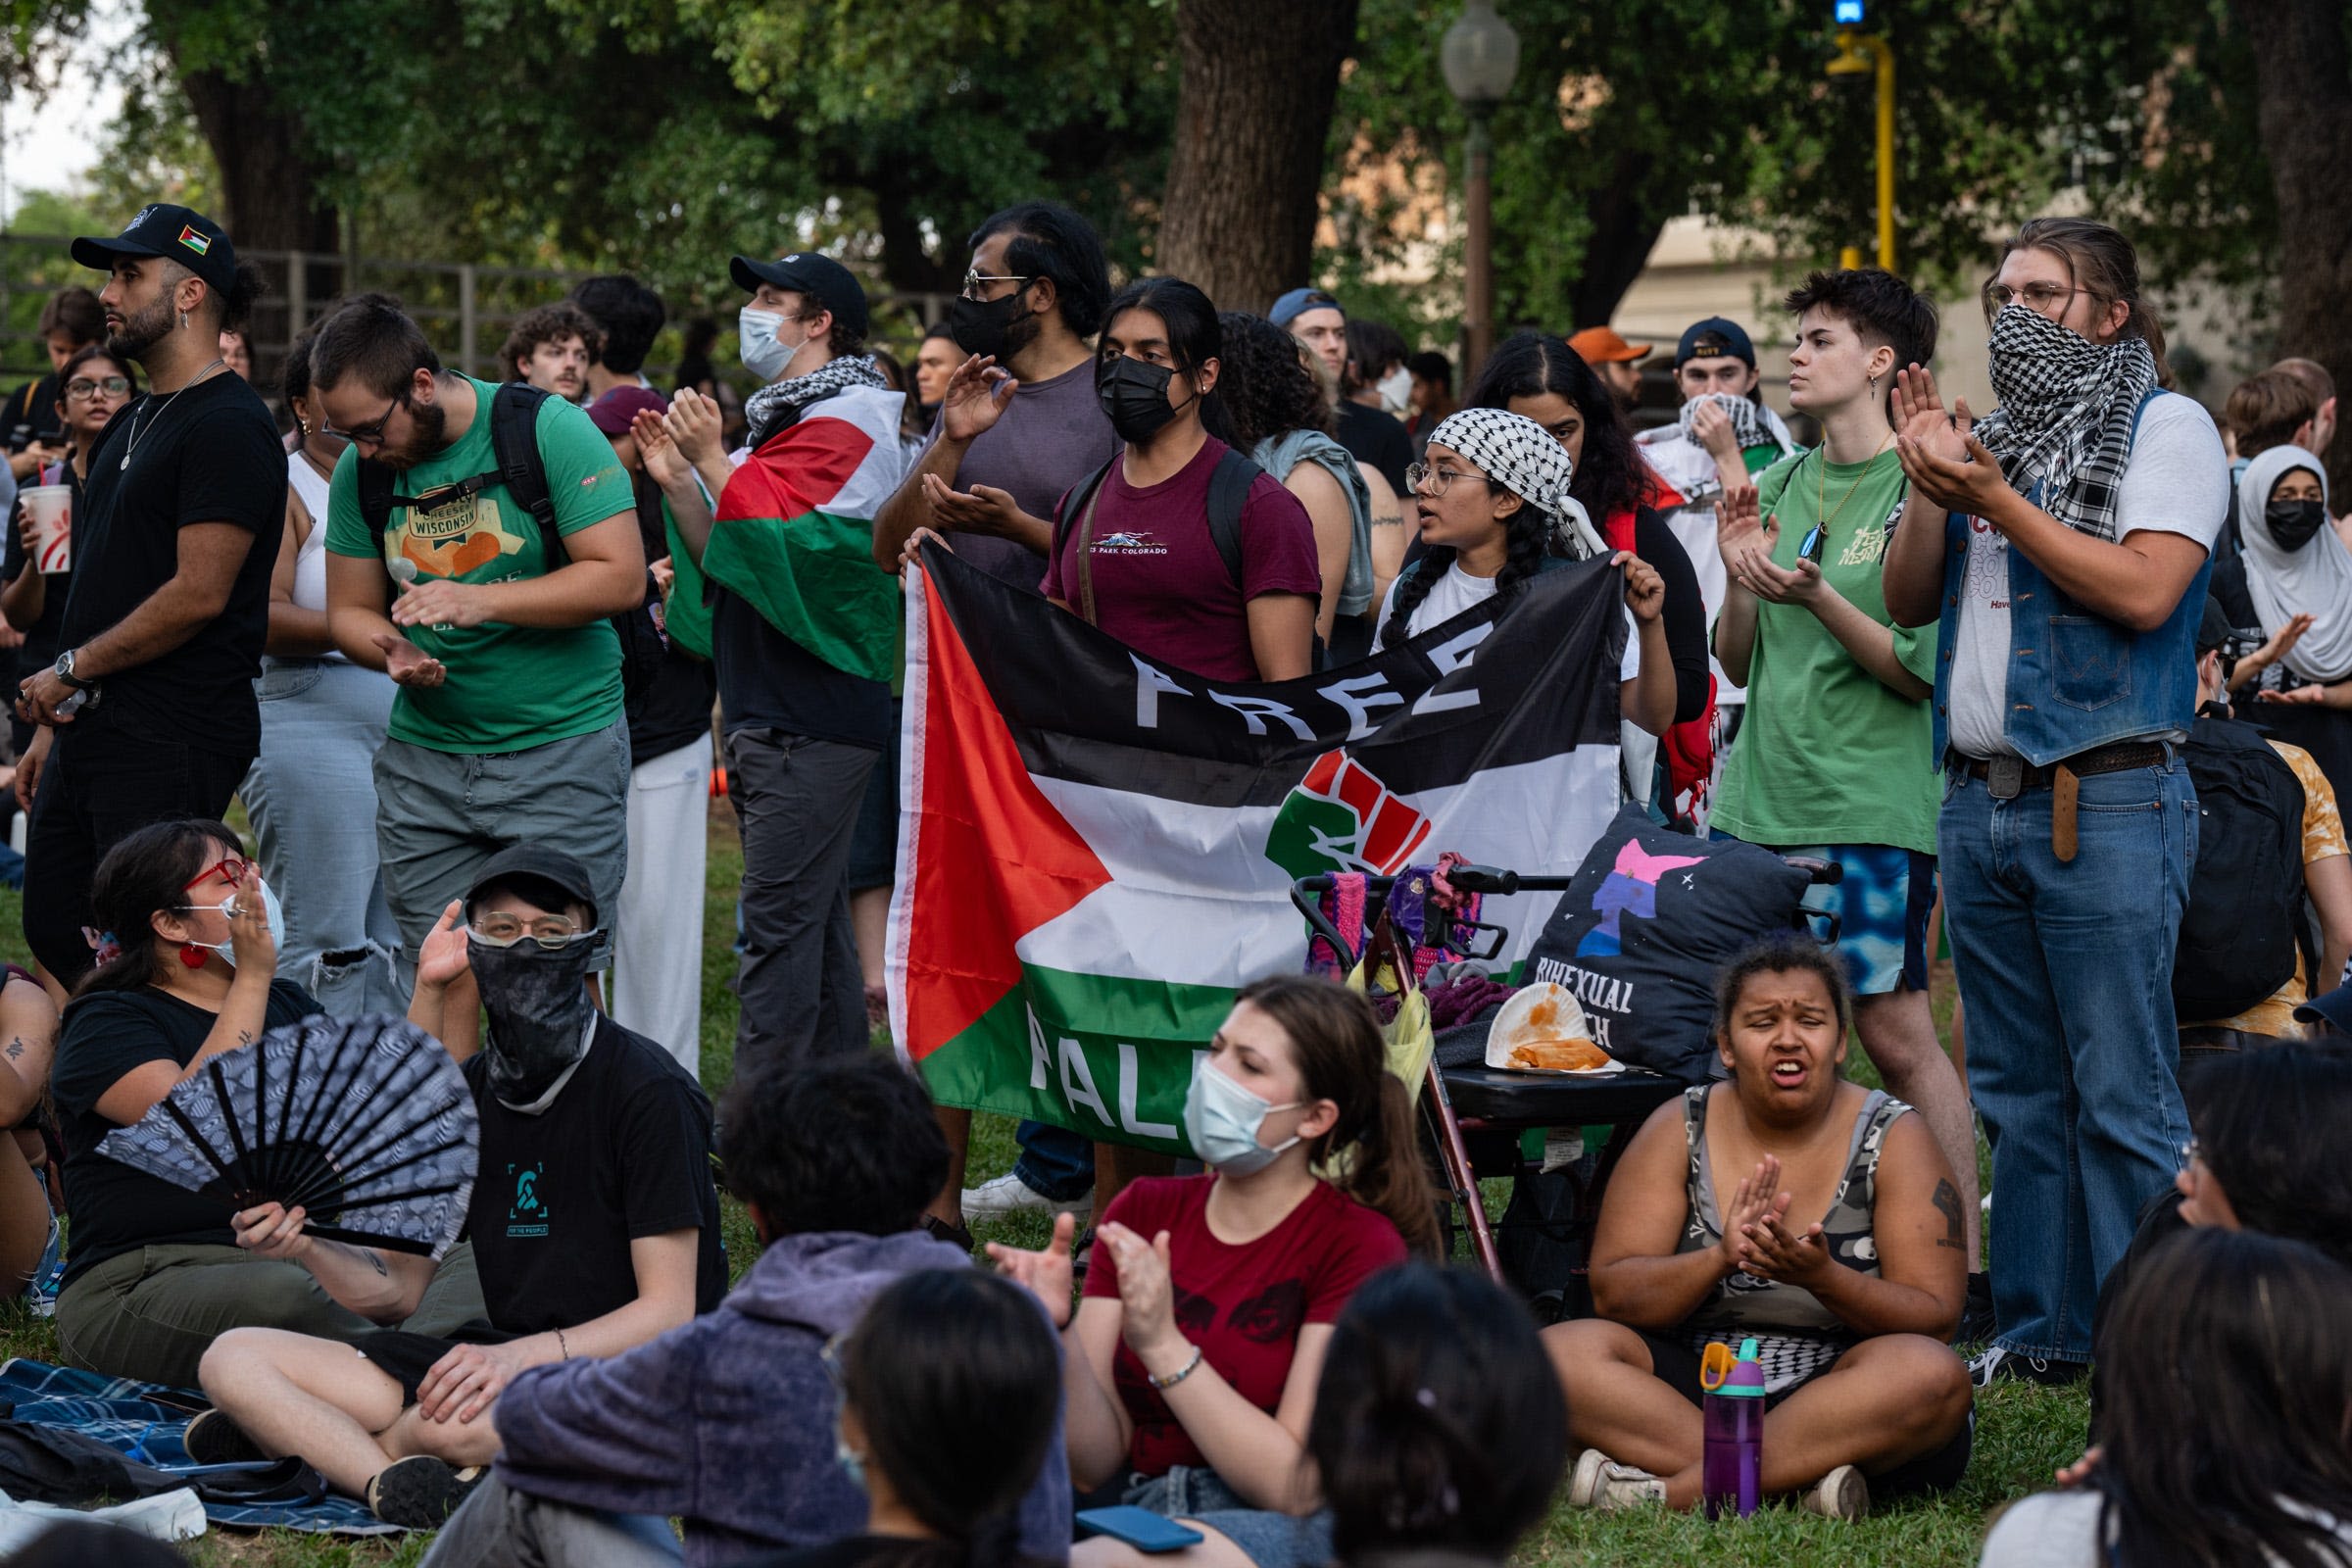 'Our university will not be occupied': UT president says pro-Palestinian protest was prohibited